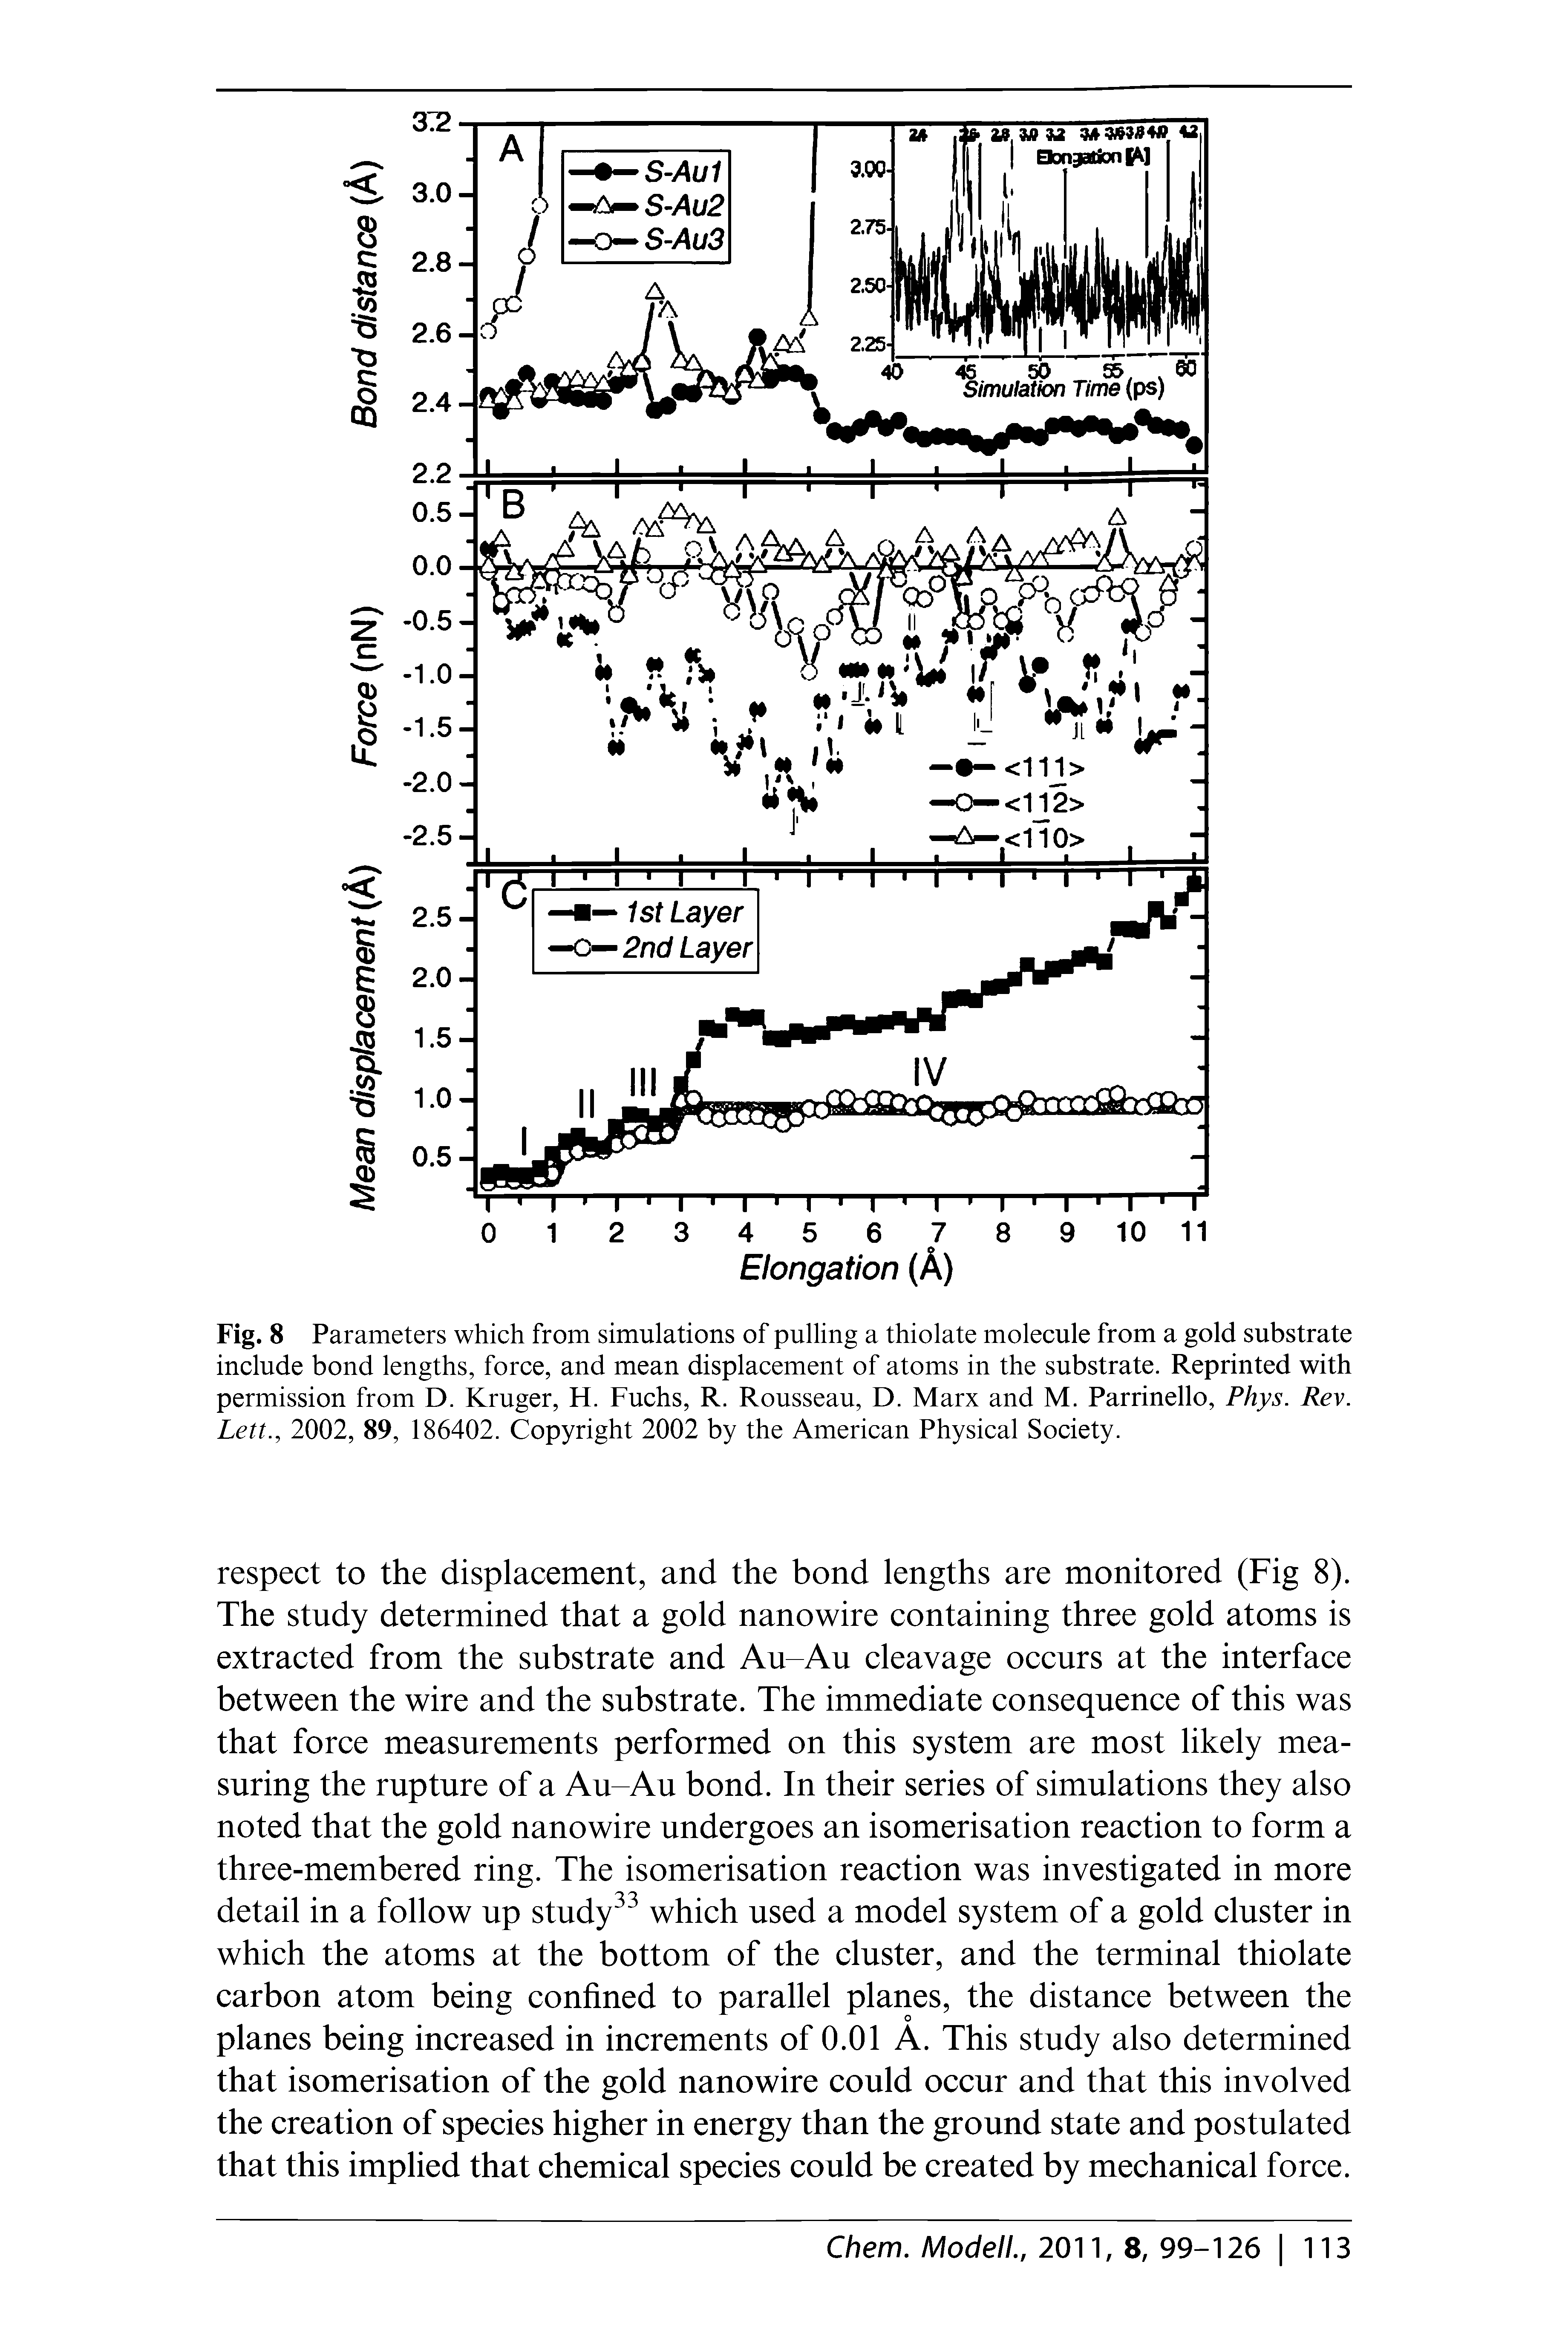 Fig. 8 Parameters which from simulations of pulling a thiolate molecule from a gold substrate include bond lengths, force, and mean displacement of atoms in the substrate. Reprinted with permission from D. Kruger, H. Fuchs, R. Rousseau, D. Marx and M. Parrinello, Phys. Rev. Lett., 2002, 89, 186402. Copyright 2002 by the American Physical Society.